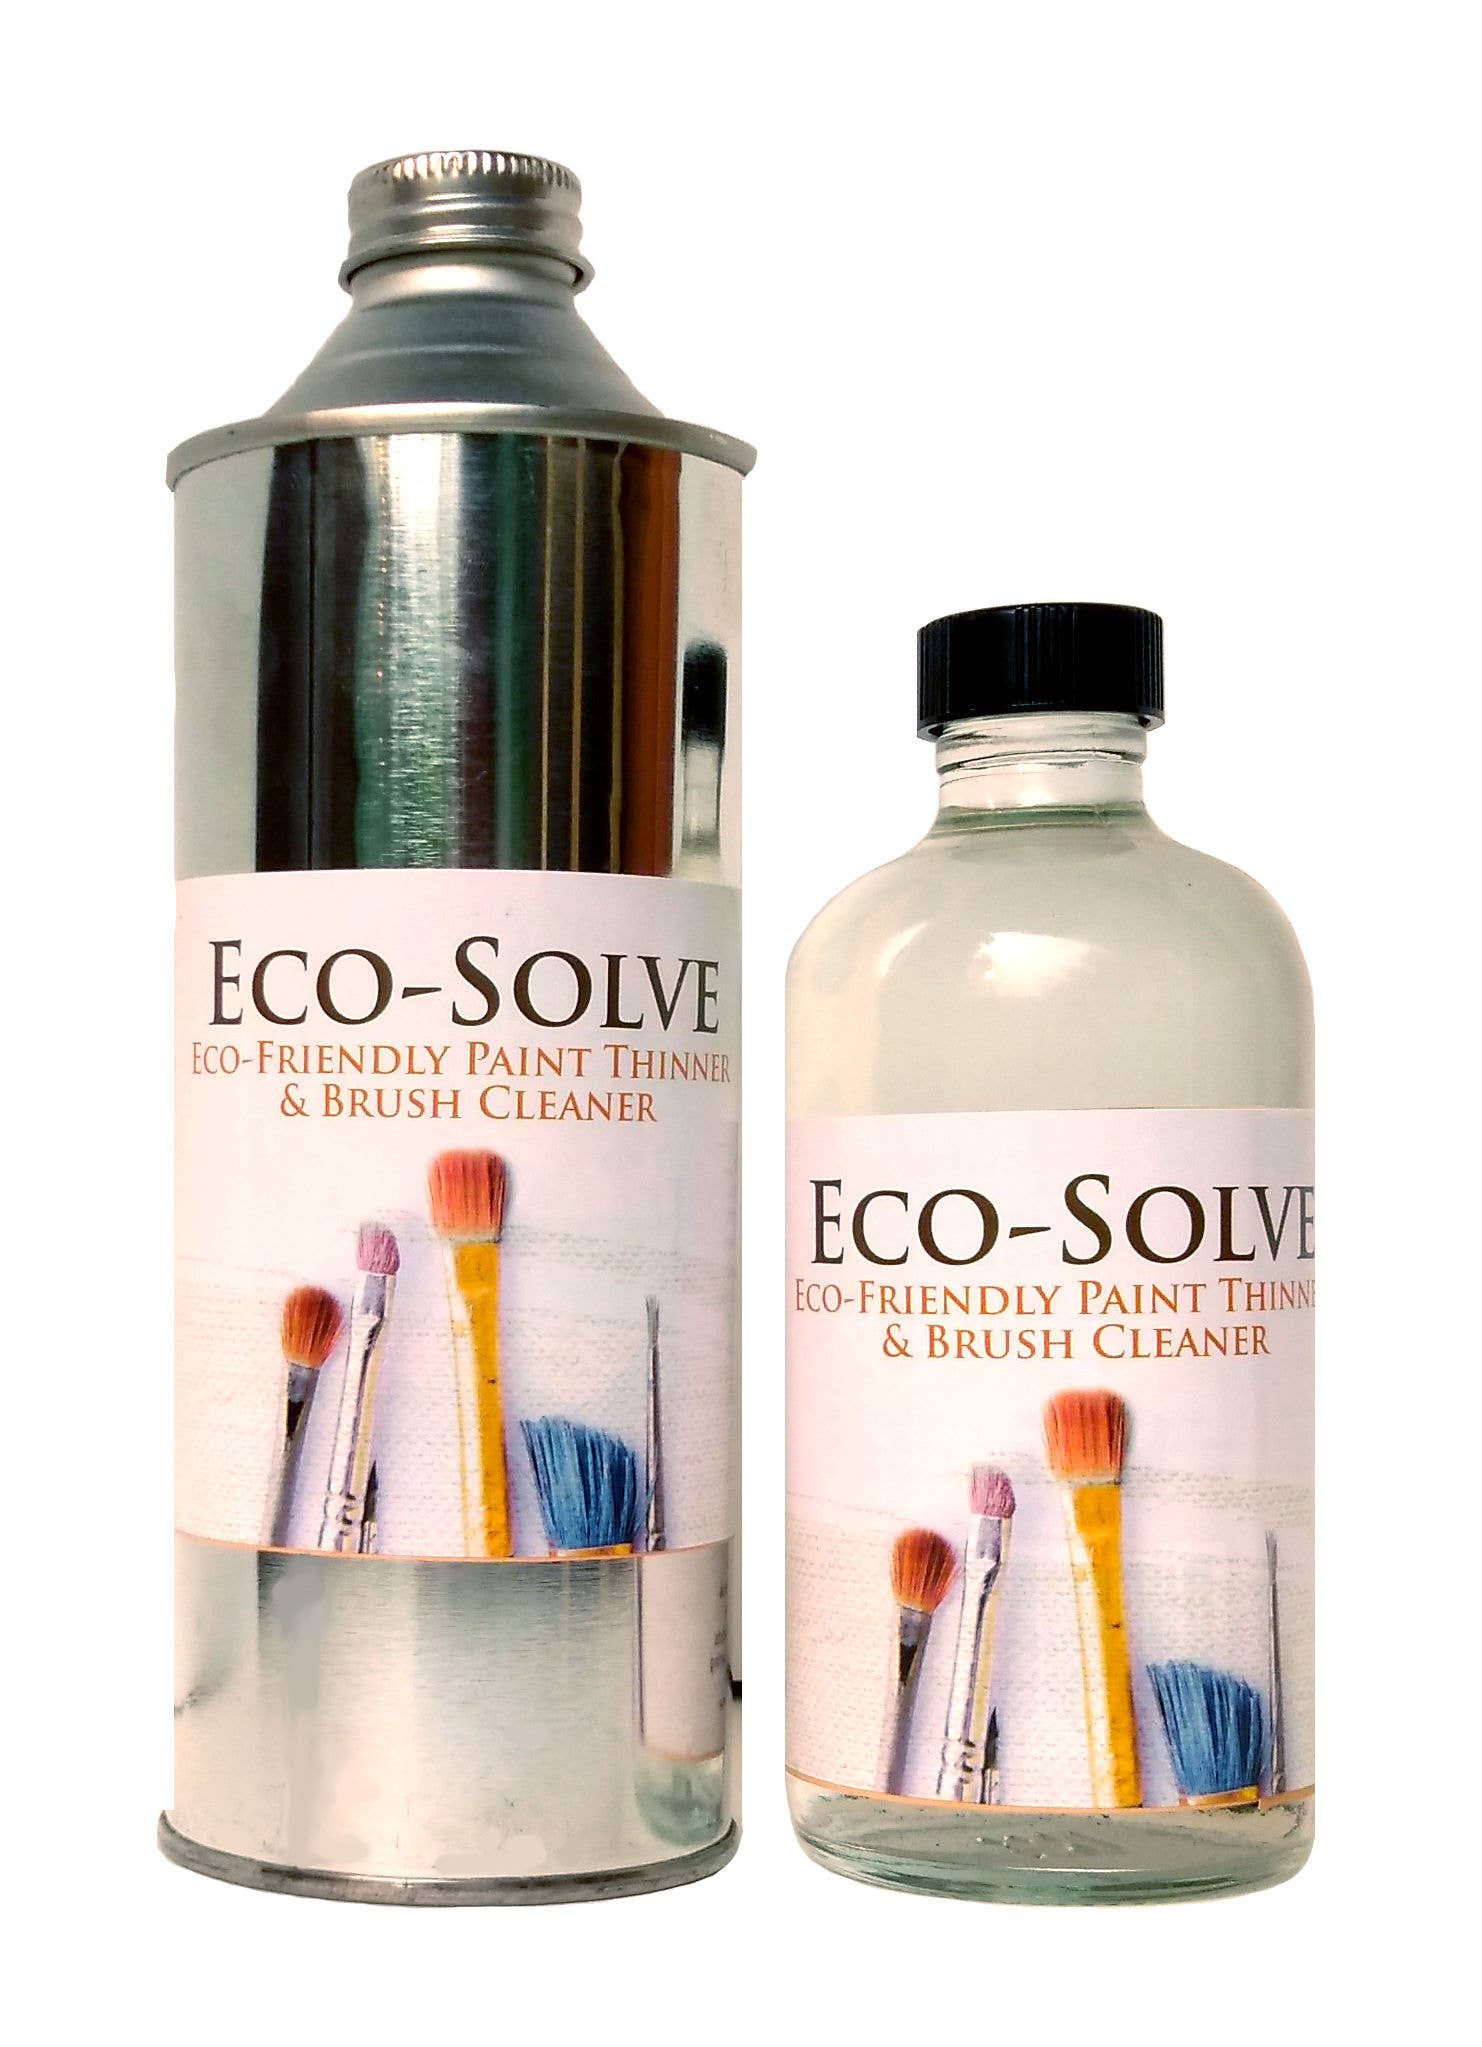 Eco-Solve - Natural Earth Paint